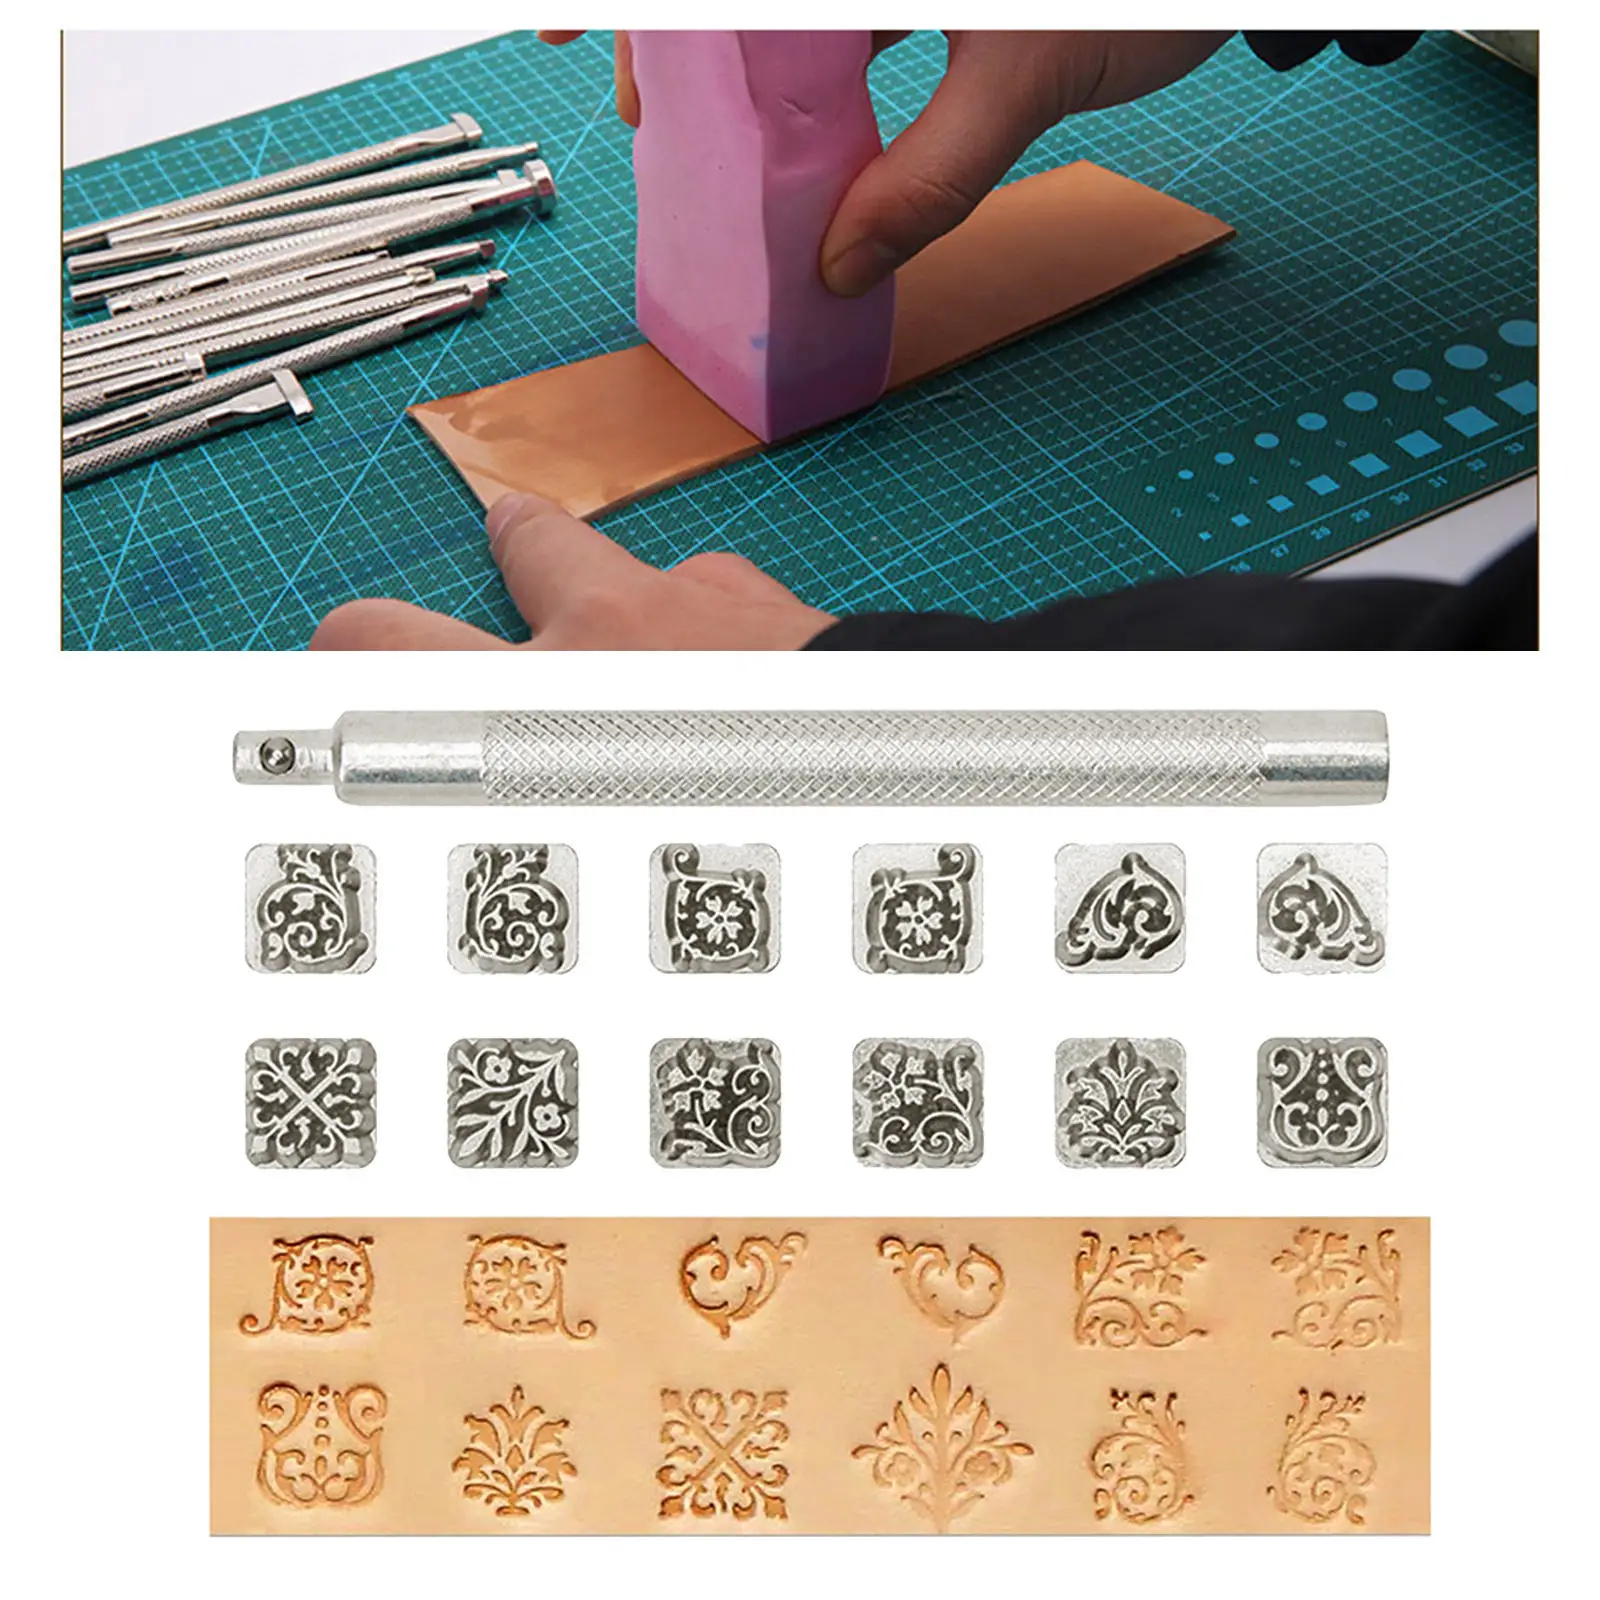 12 Styles Leather Craft Stamps Set Leathercraft Working Saddle Making Tools Carving Solid DIY Printing Clouds Stamping